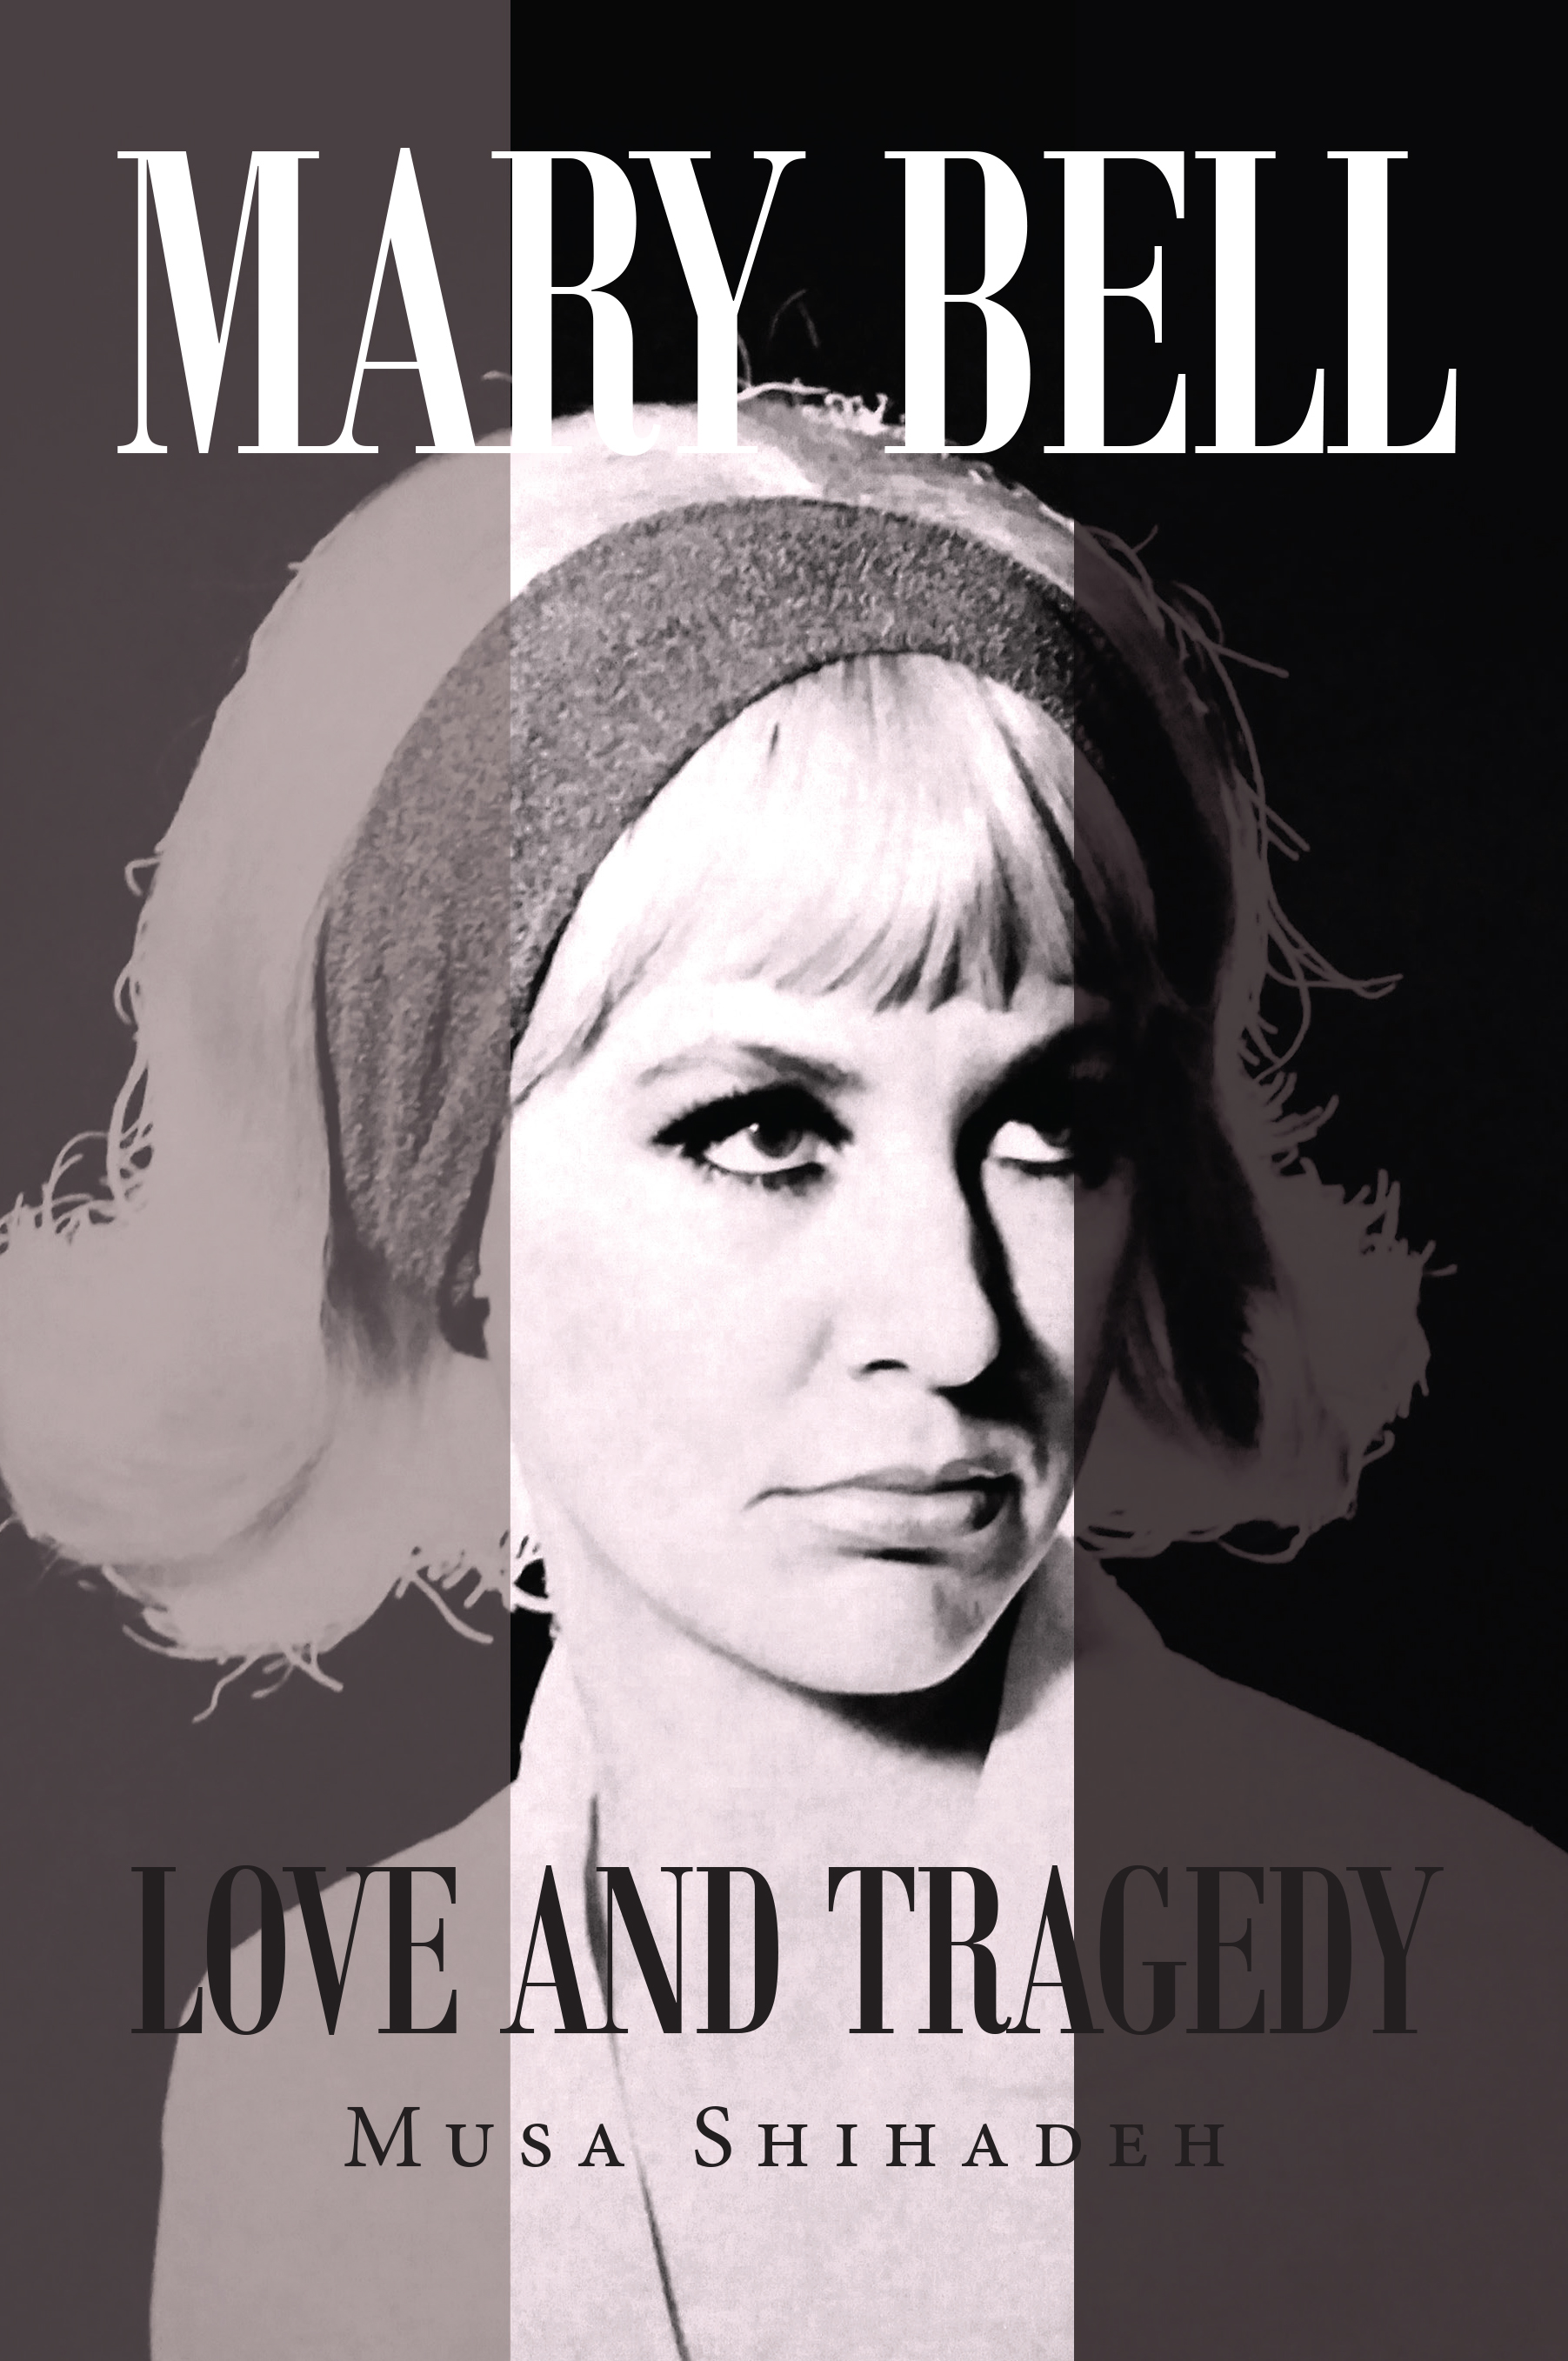 Mary Bell: A Great Pickup for Anyone in Search of Awakening and Truth. 